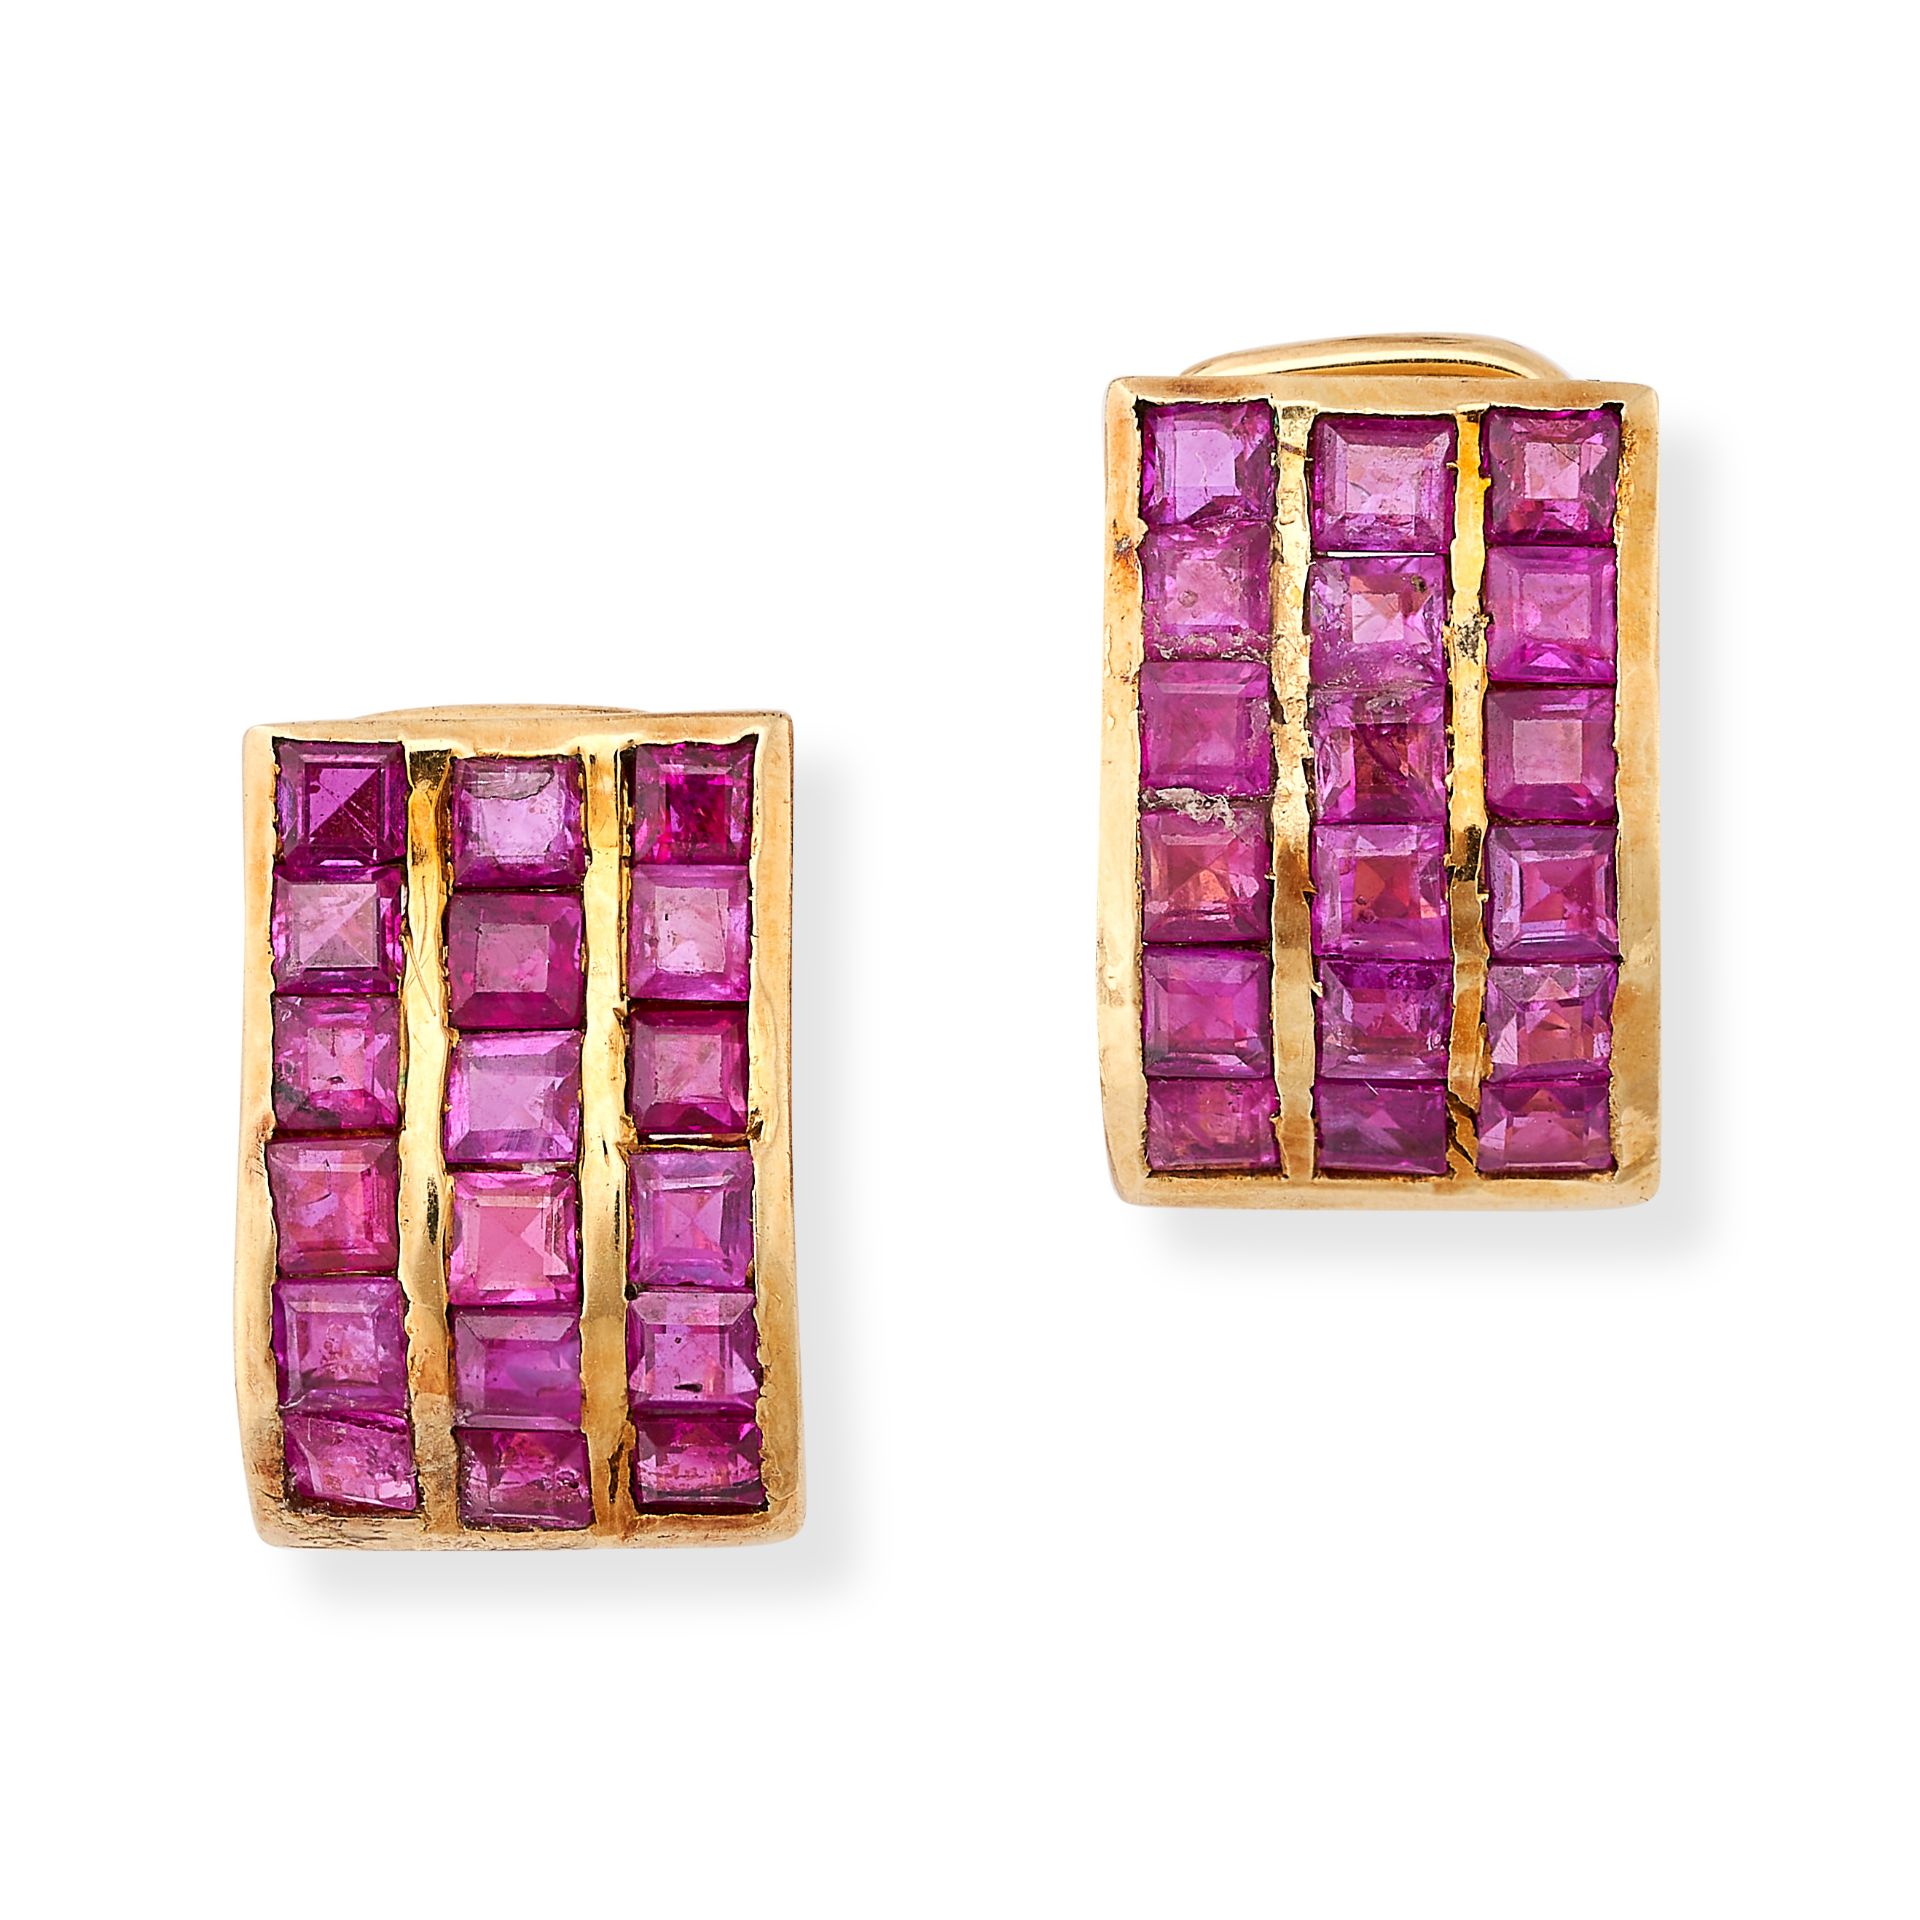 A PAIR OF RUBY EARRINGS in yellow gold, each set with three rows of square step cut rubies, post and